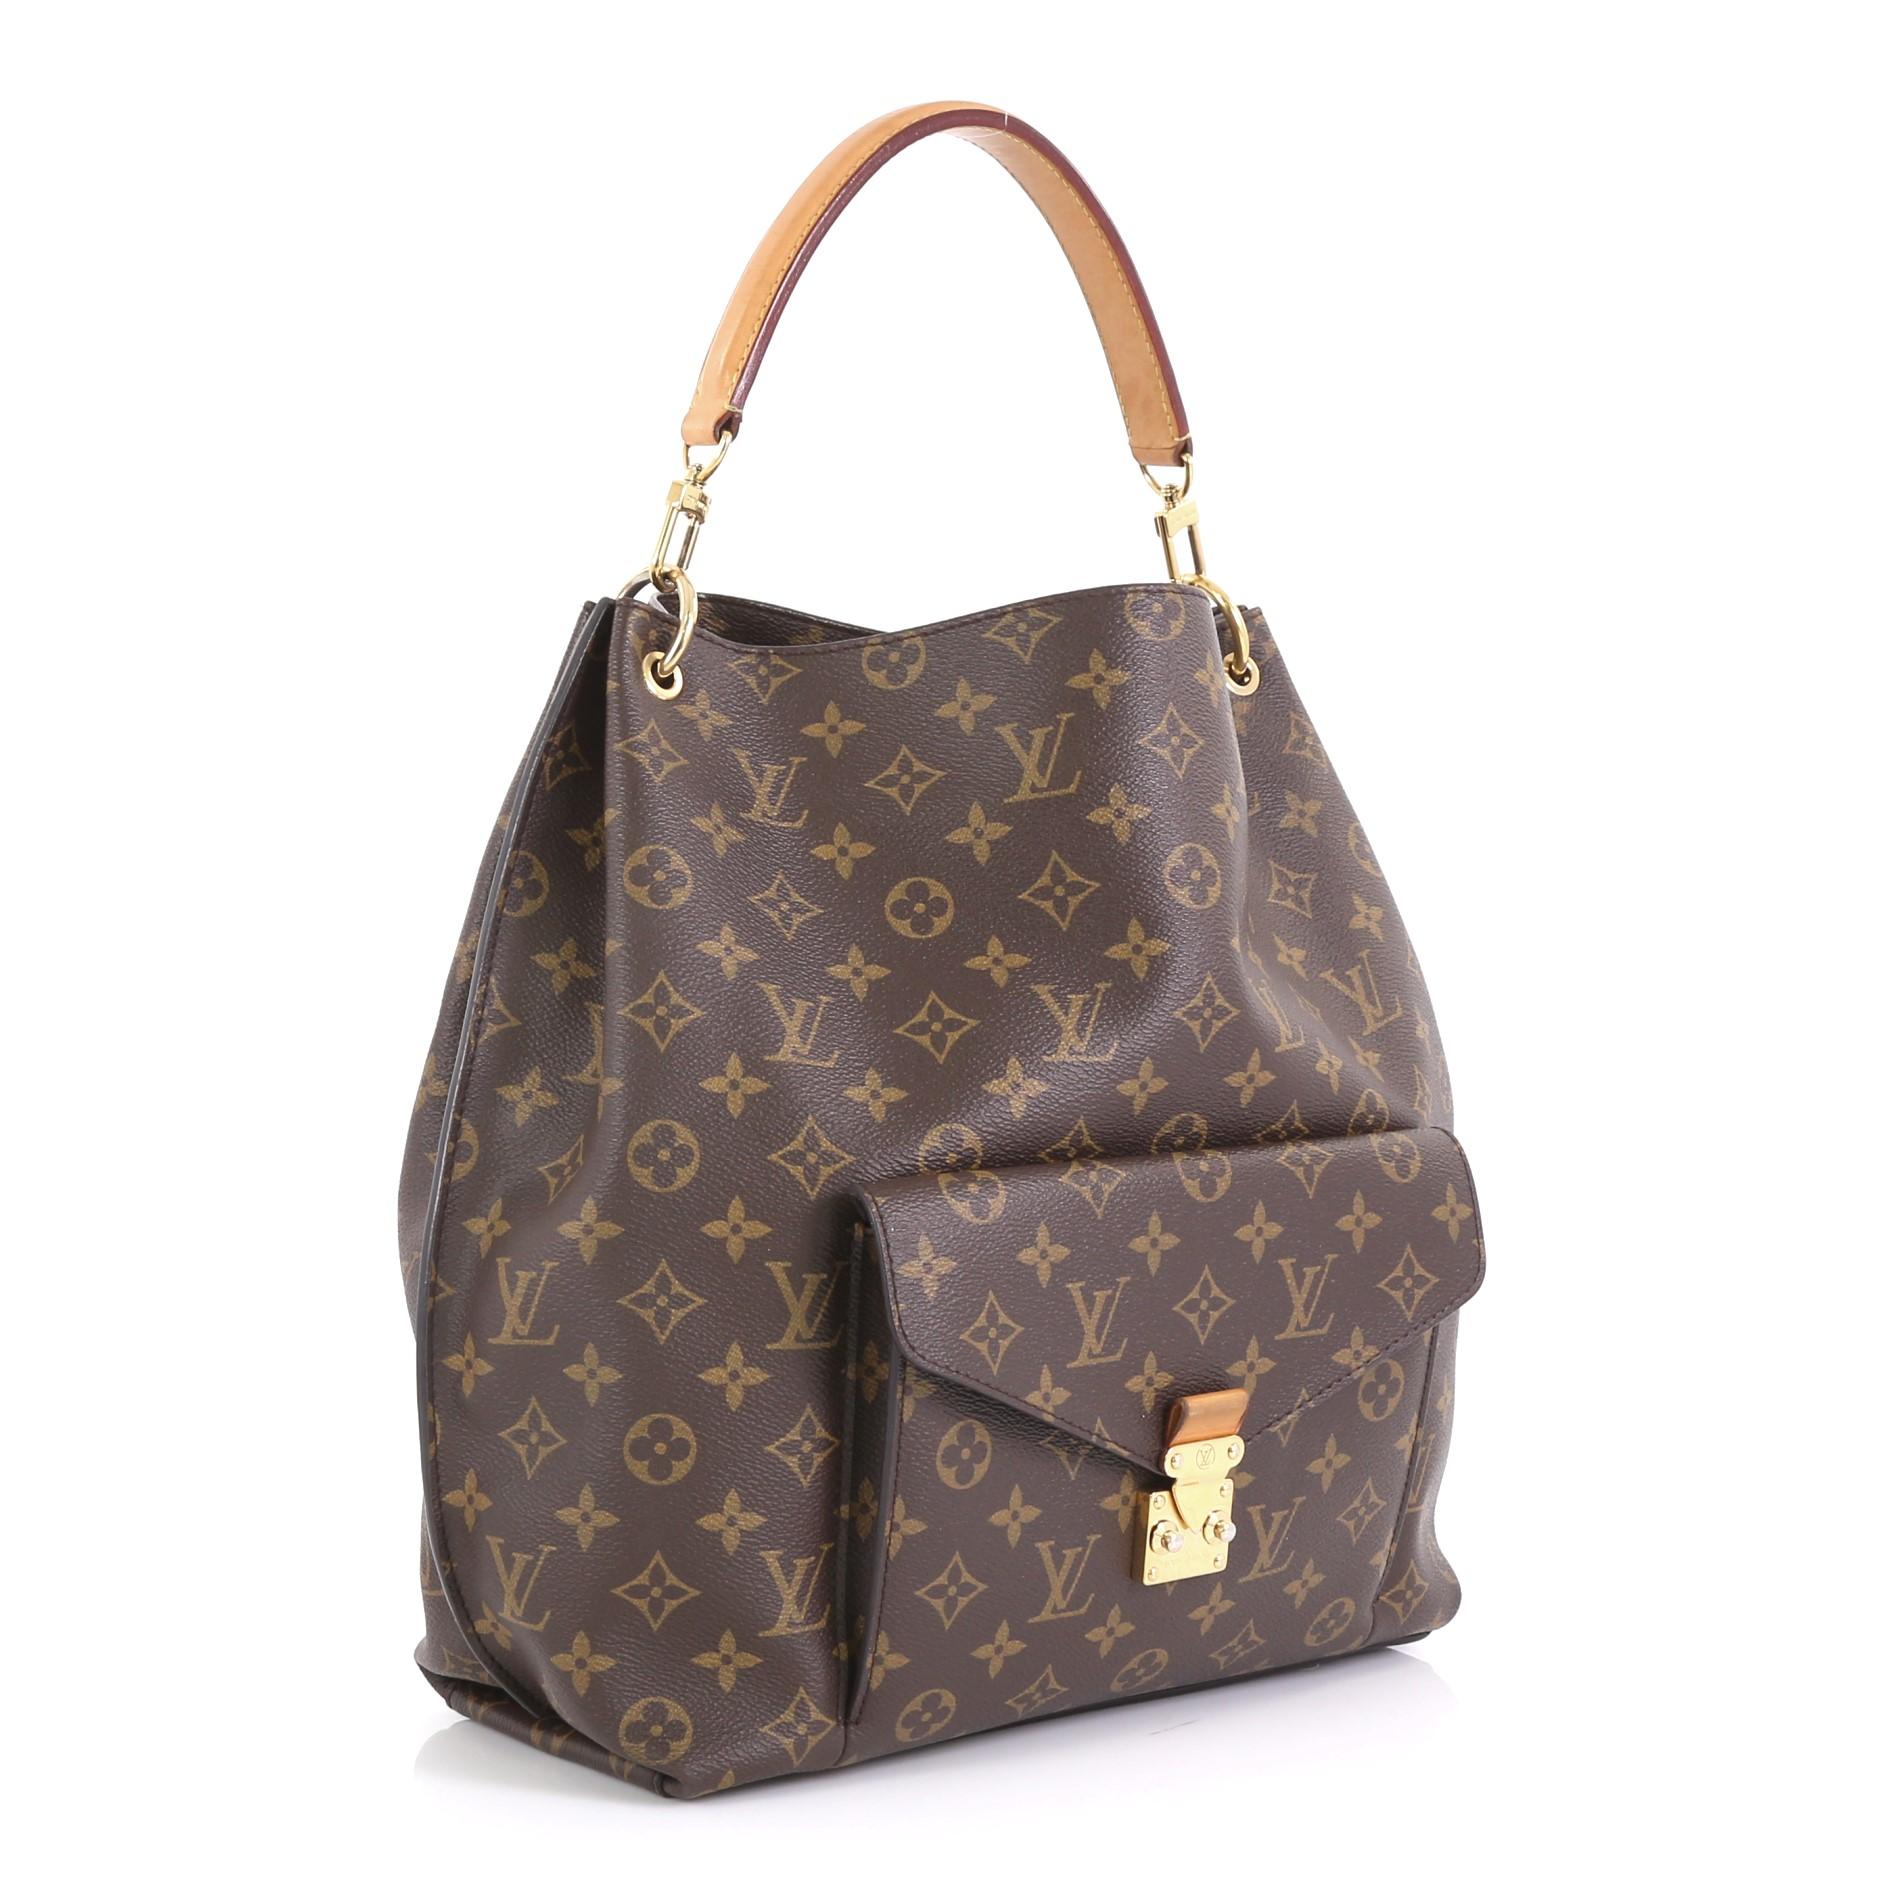 This Louis Vuitton Metis Hobo Monogram Canvas, crafted in brown monogram coated canvas, features vachetta leather handle, front flap pocket with S-lock closure, protective base studs and gold-tone hardware. Its wide top opening showcases brown